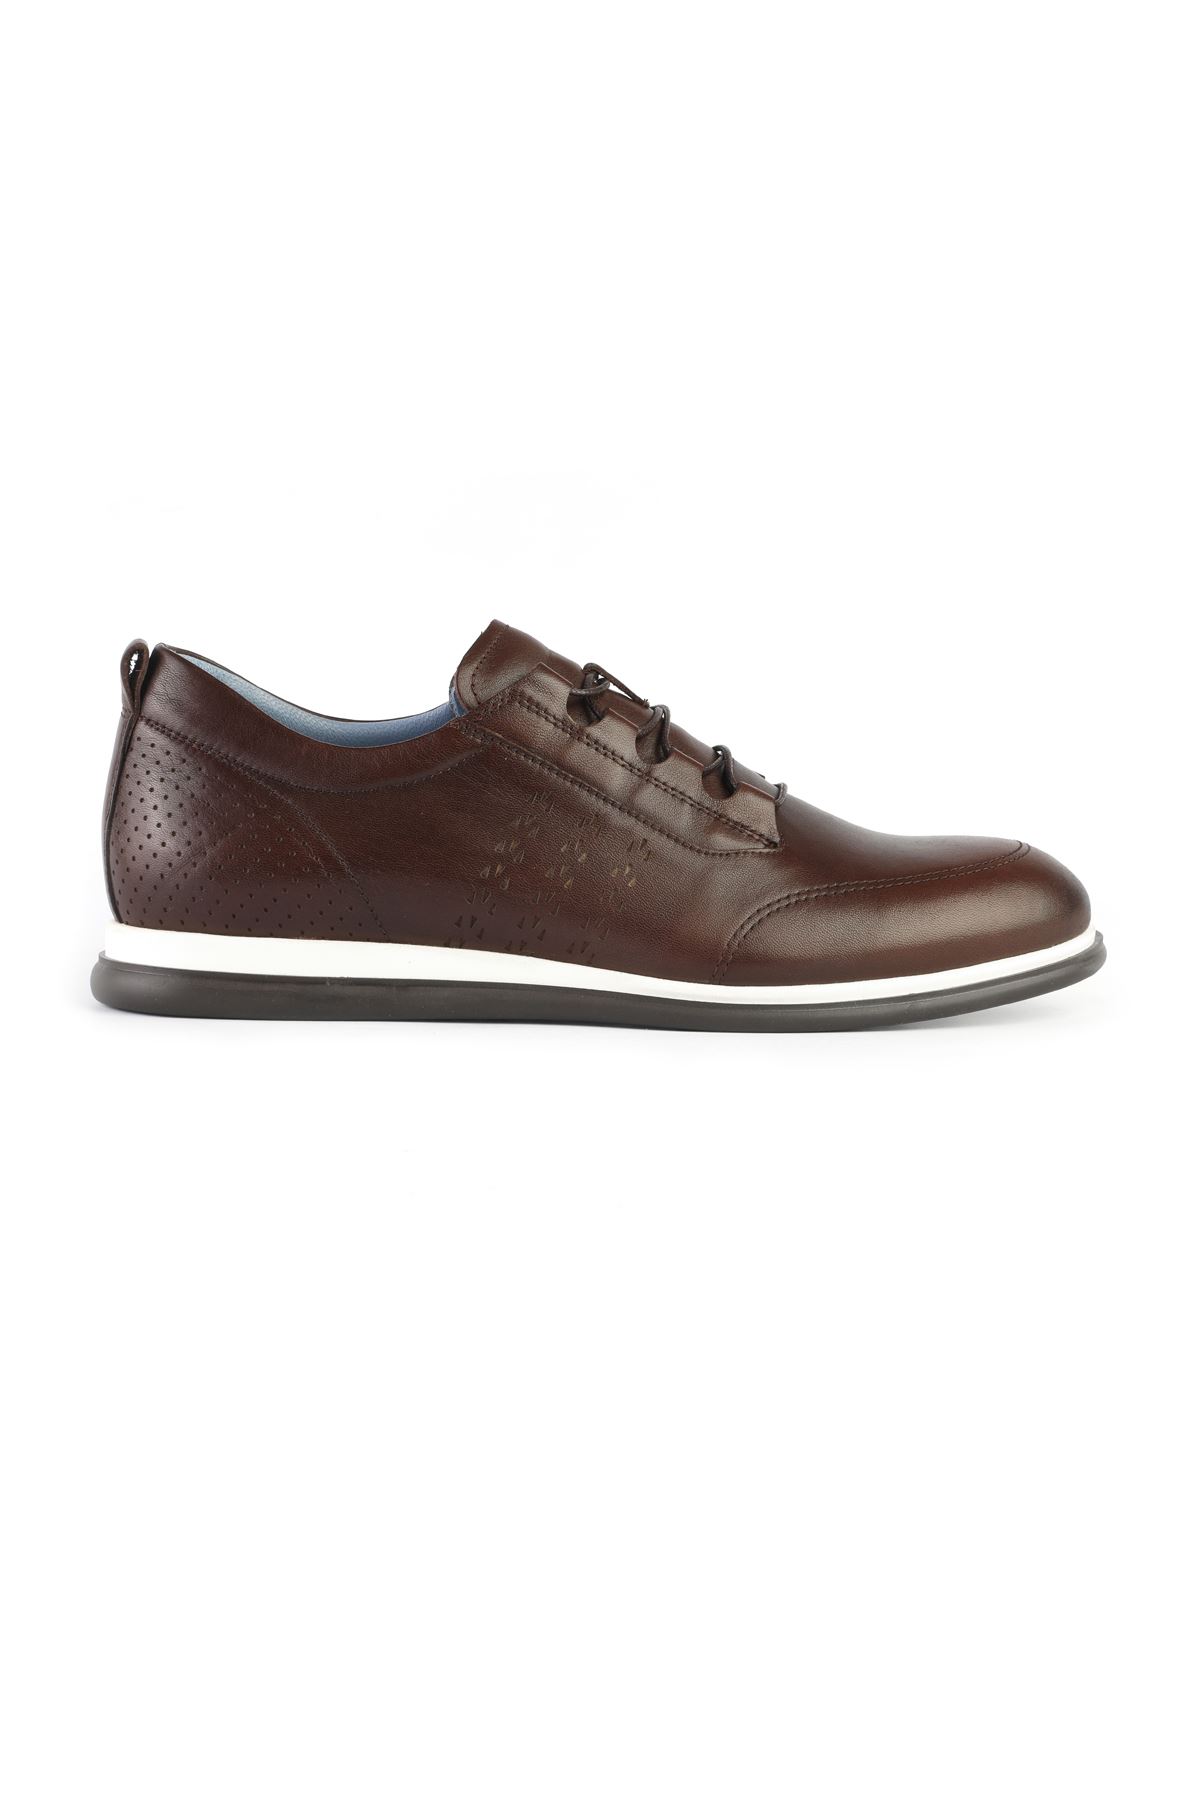 Libero 3274 Brown Casual Shoes